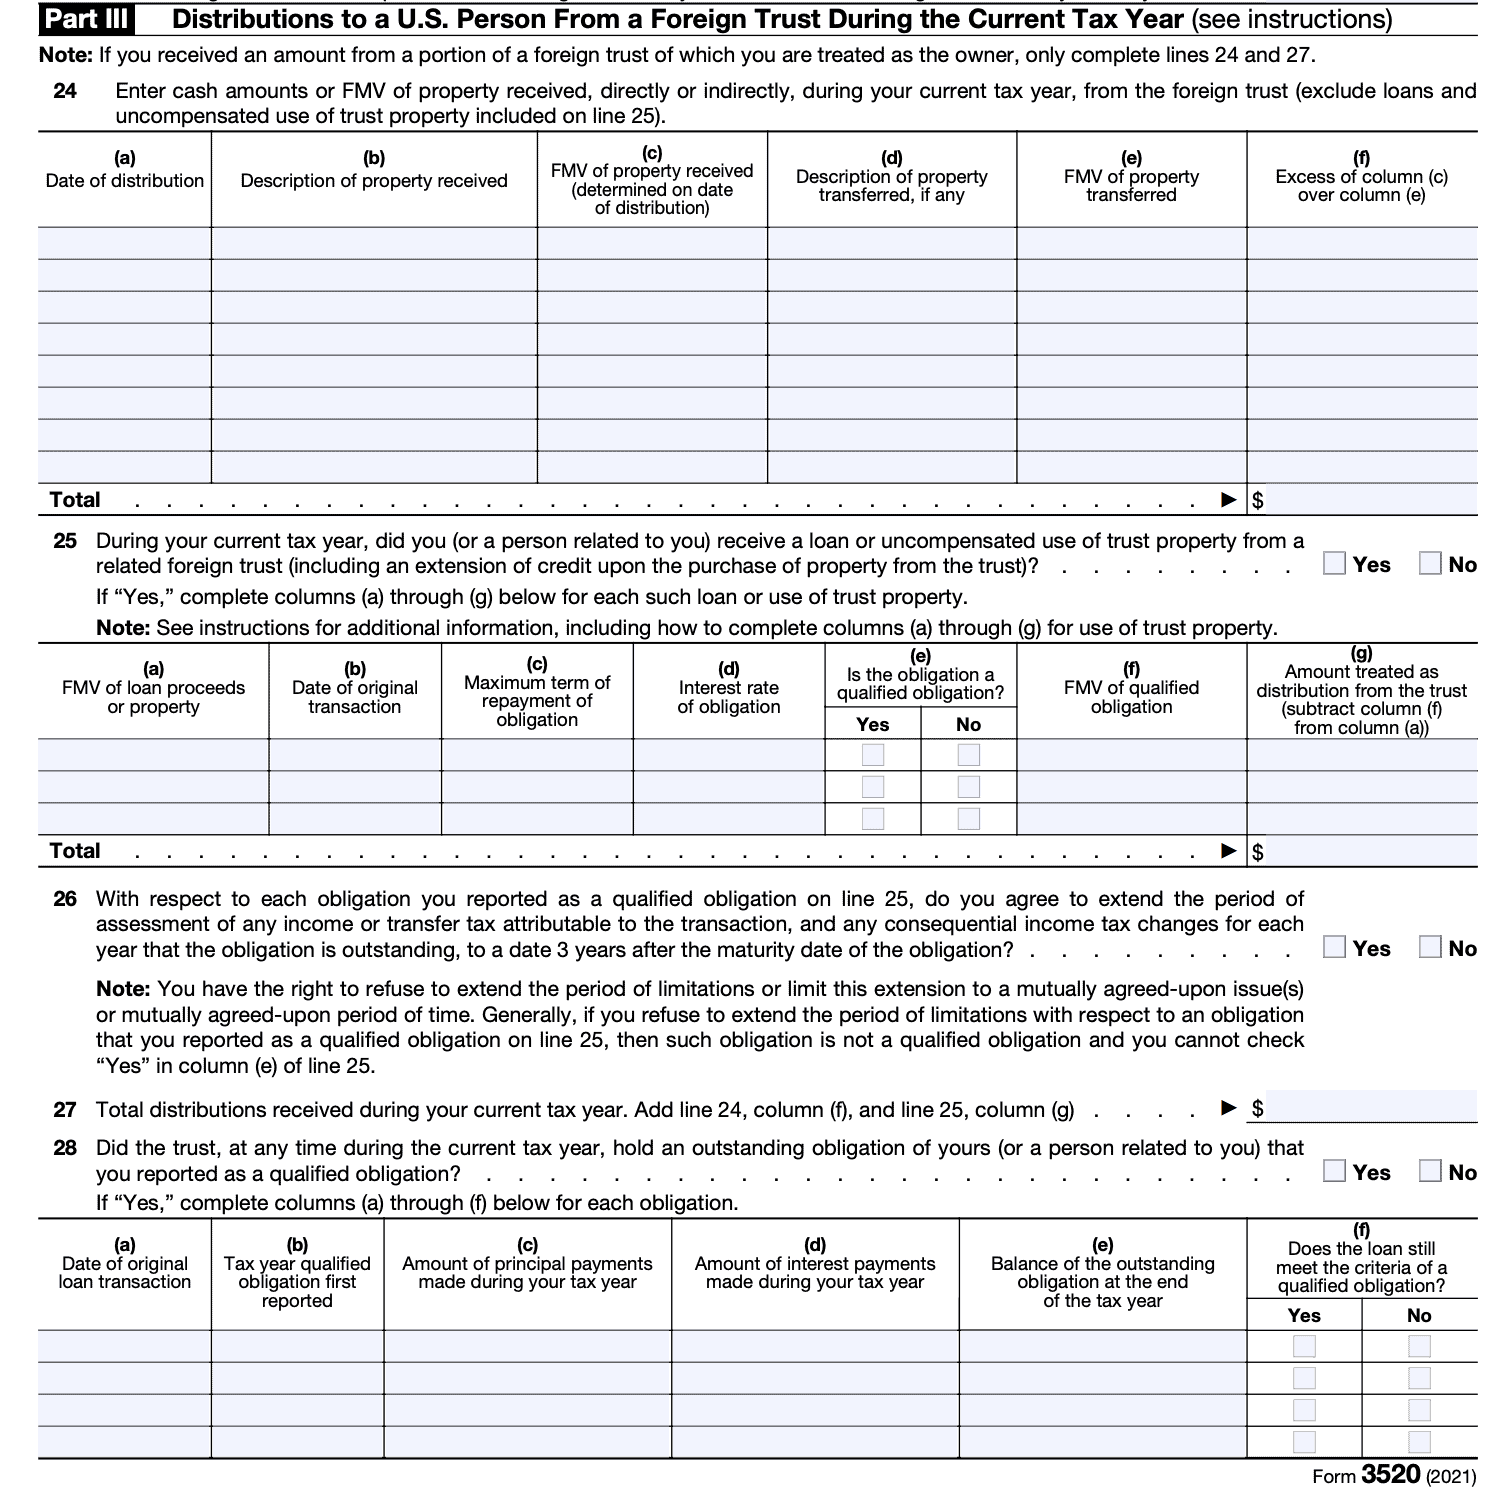 irs form 3520, part iii.